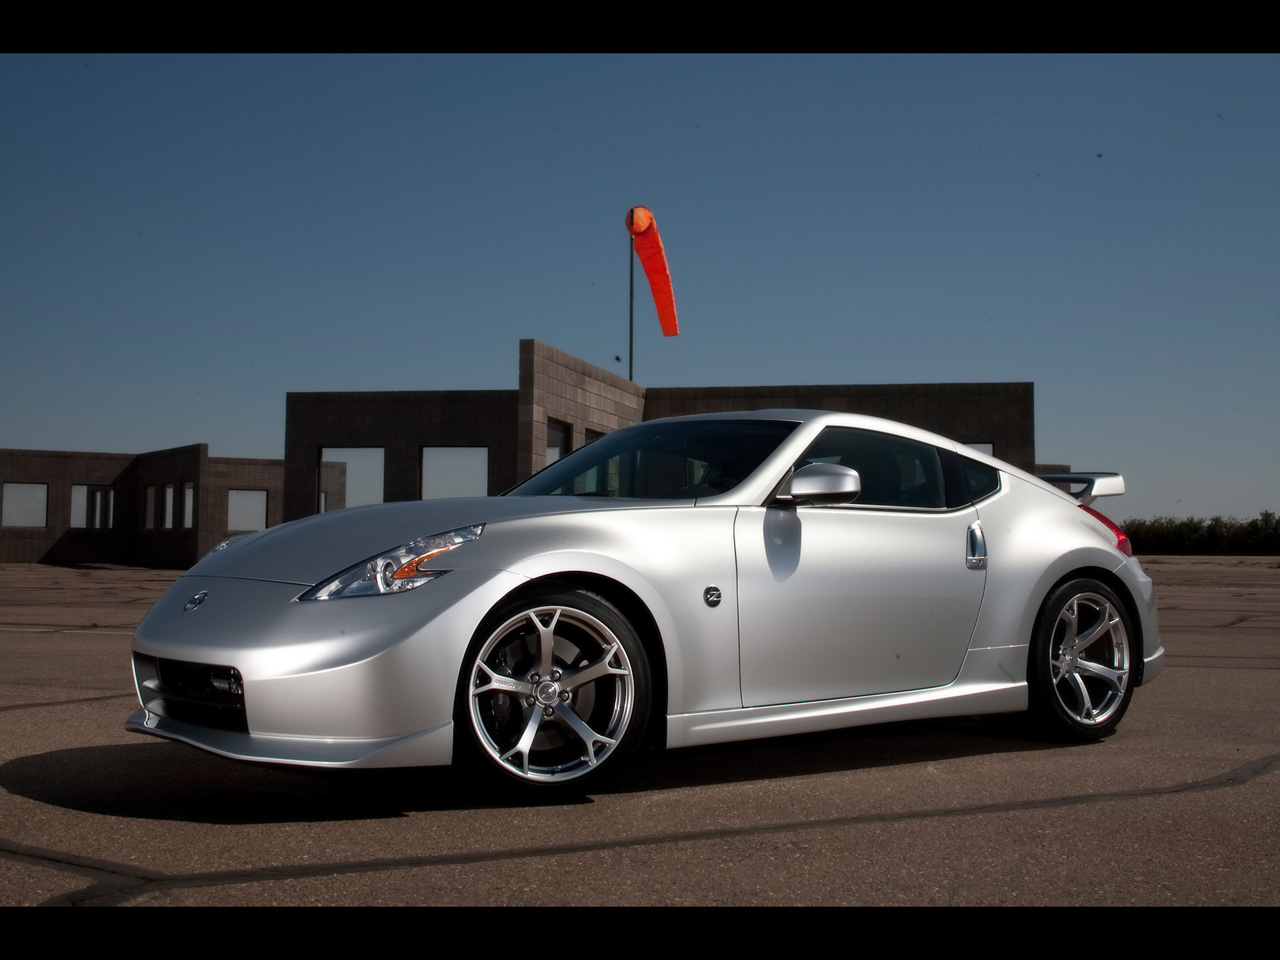 Nissan Car Wallpapers | HD Wallpapers Pulse